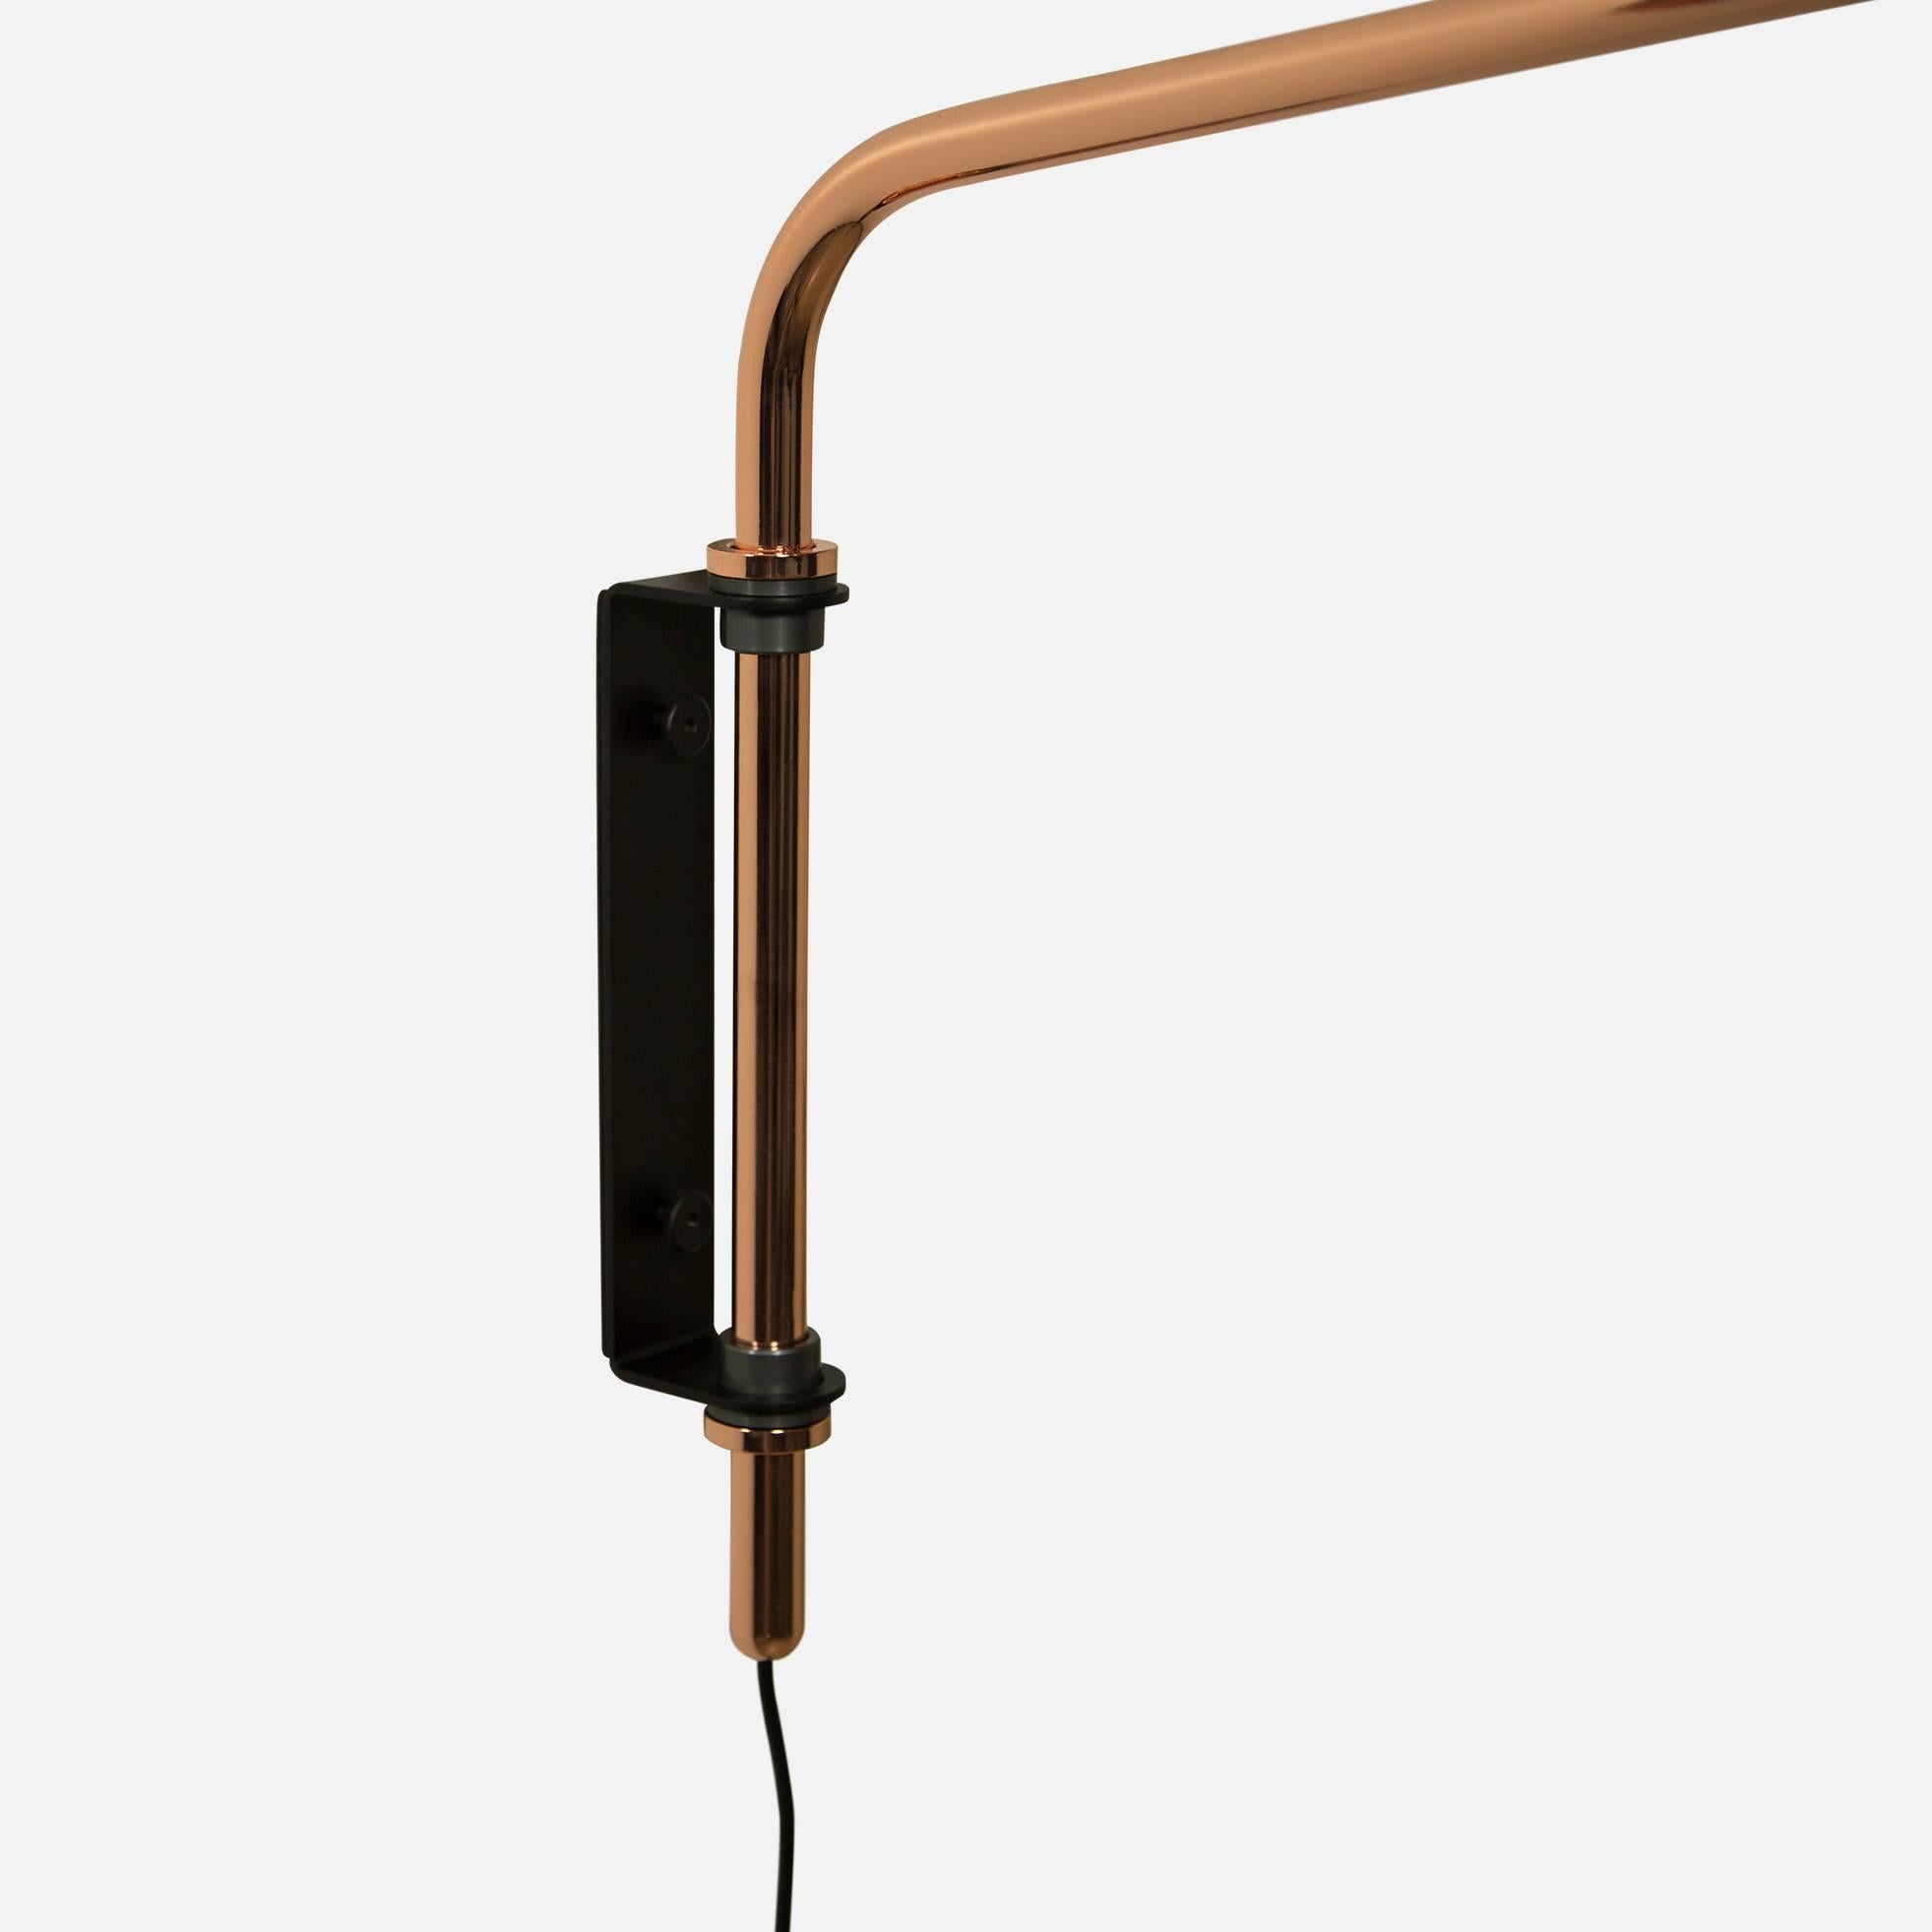 Contemporary Signal Swing Arm Sconce, Black x Nickel, Short, Hardwire, Souda, Made to Order For Sale